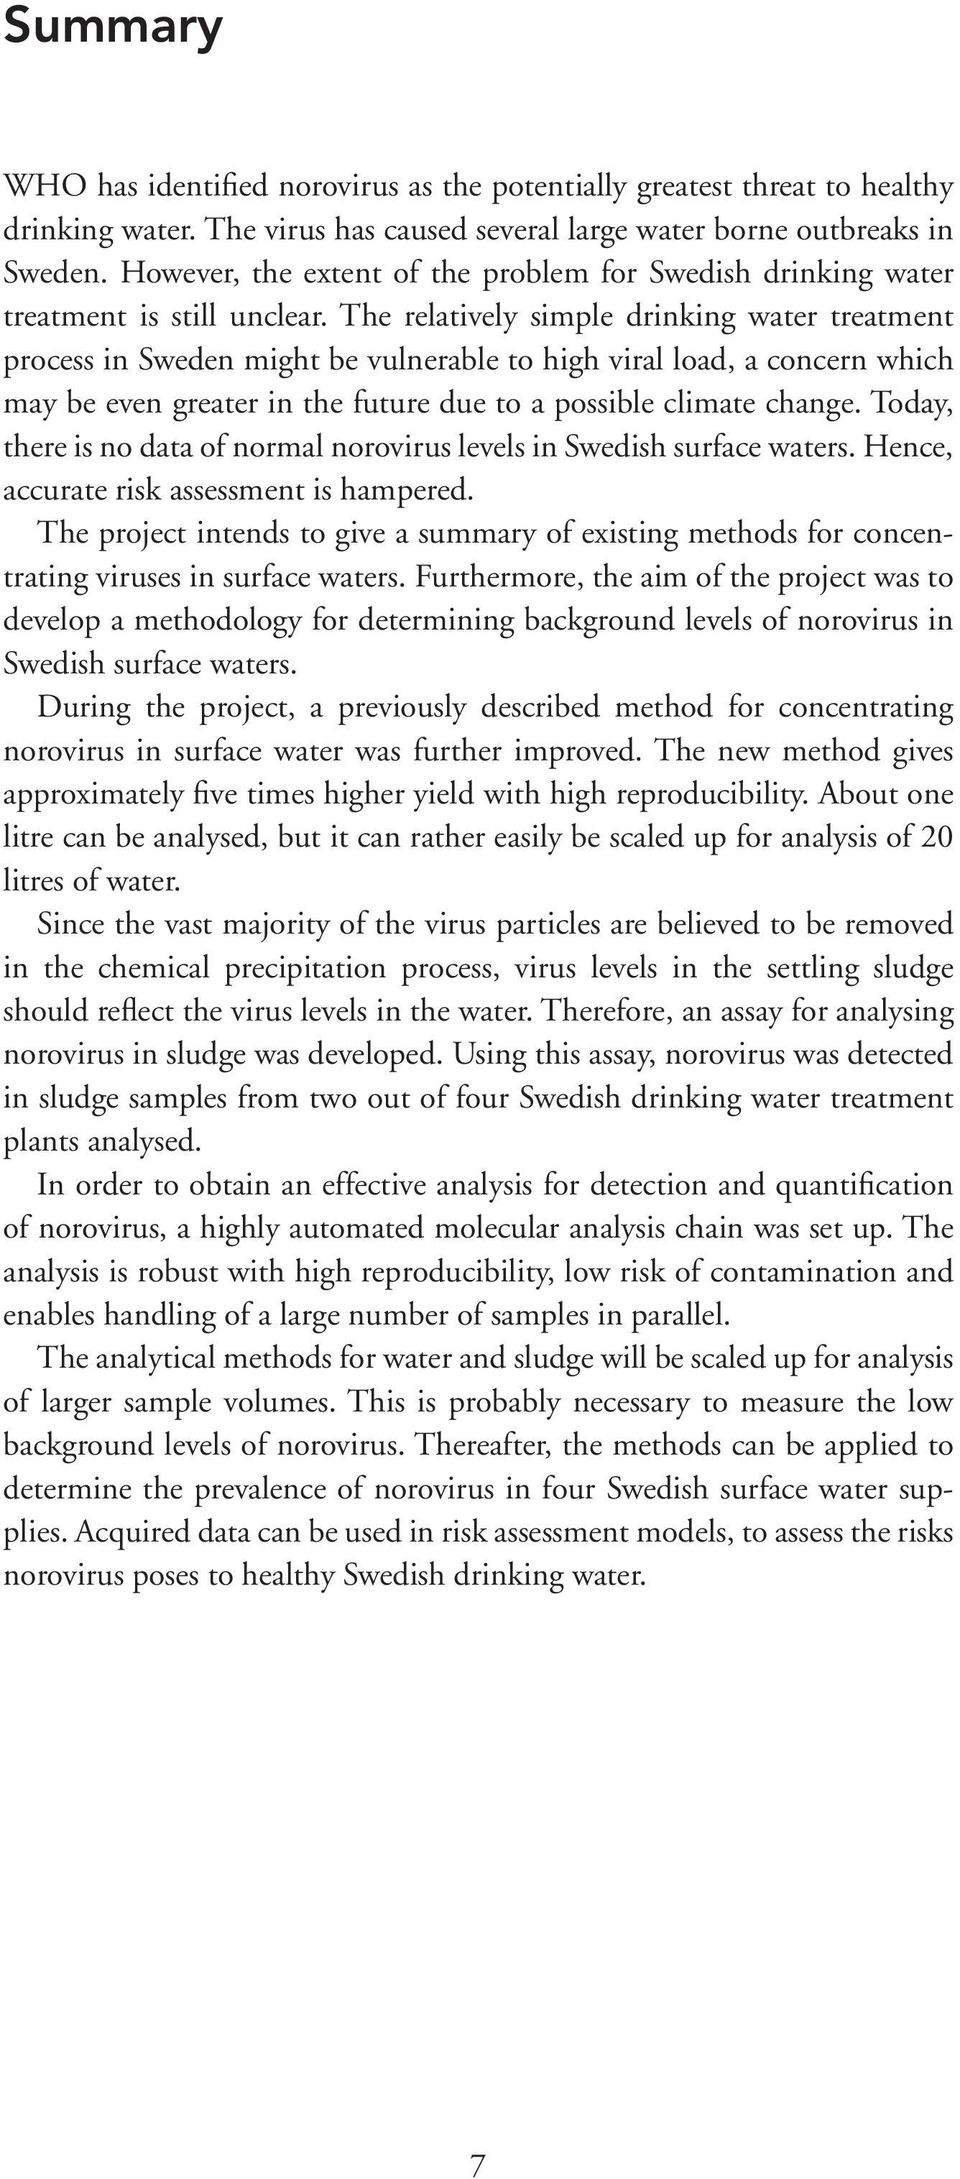 The relatively simple drinking water treatment process in Sweden might be vulnerable to high viral load, a concern which may be even greater in the future due to a possible climate change.